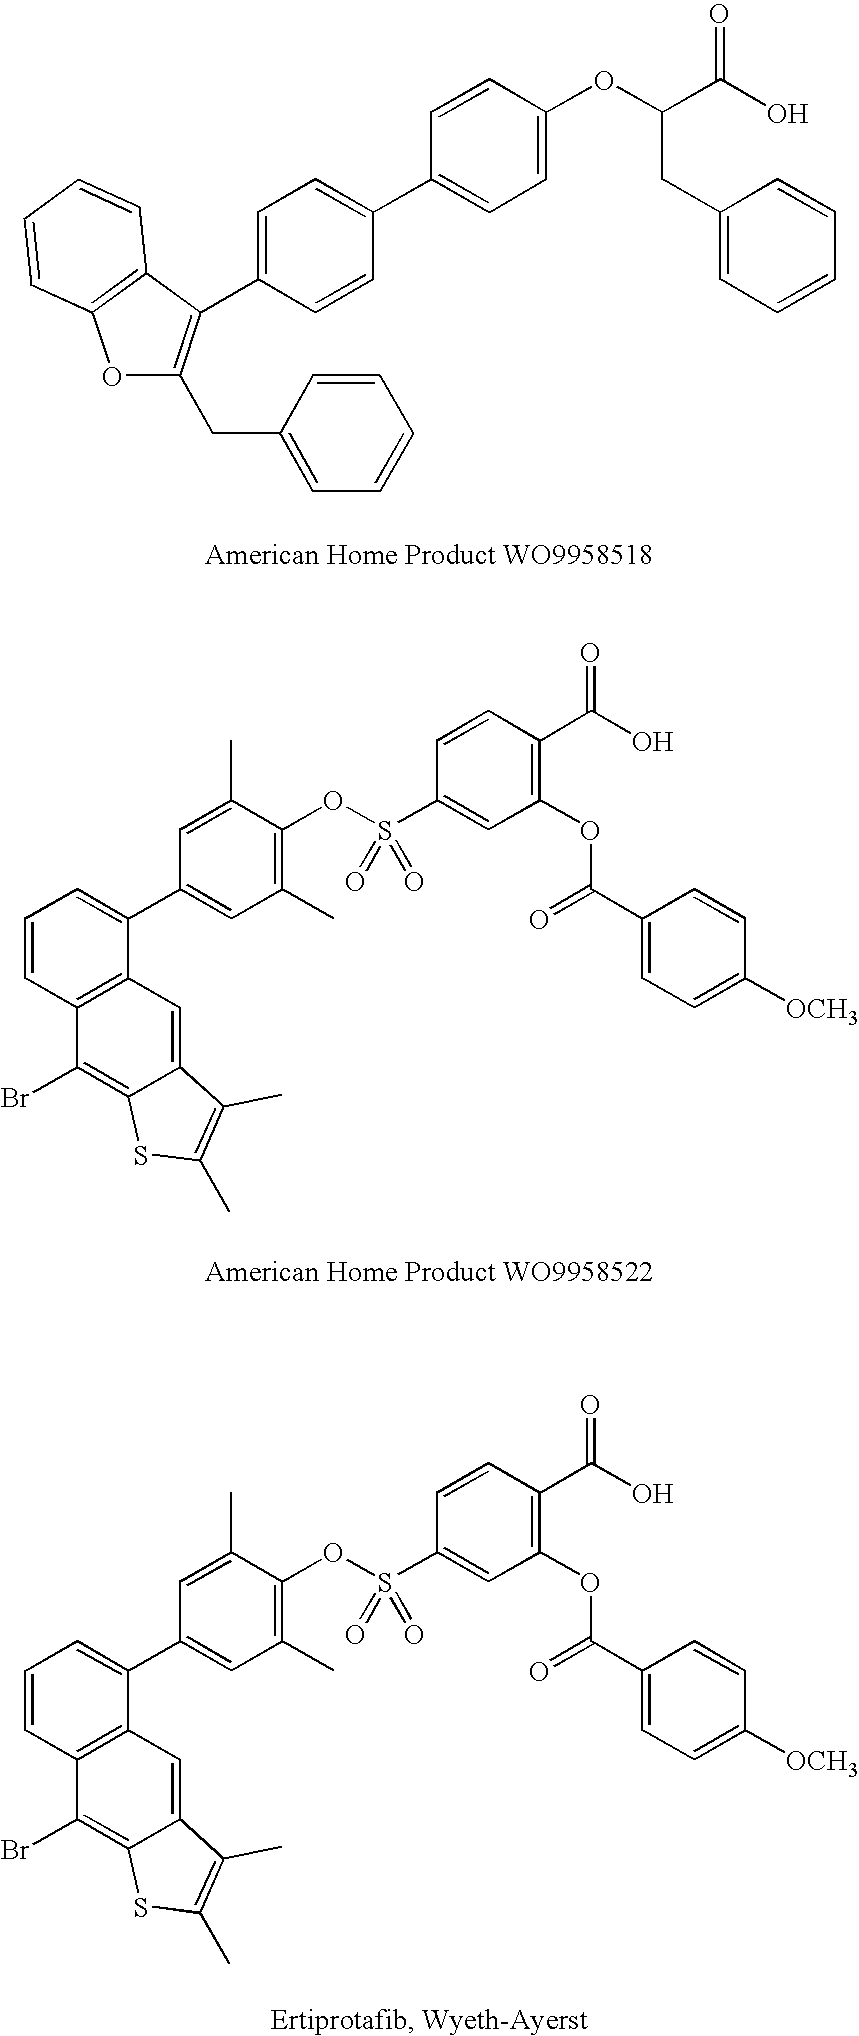 Rhodanine Derivatives, a Process for the Preparation Thereof and Pharmaceutical Composition Containing the Same